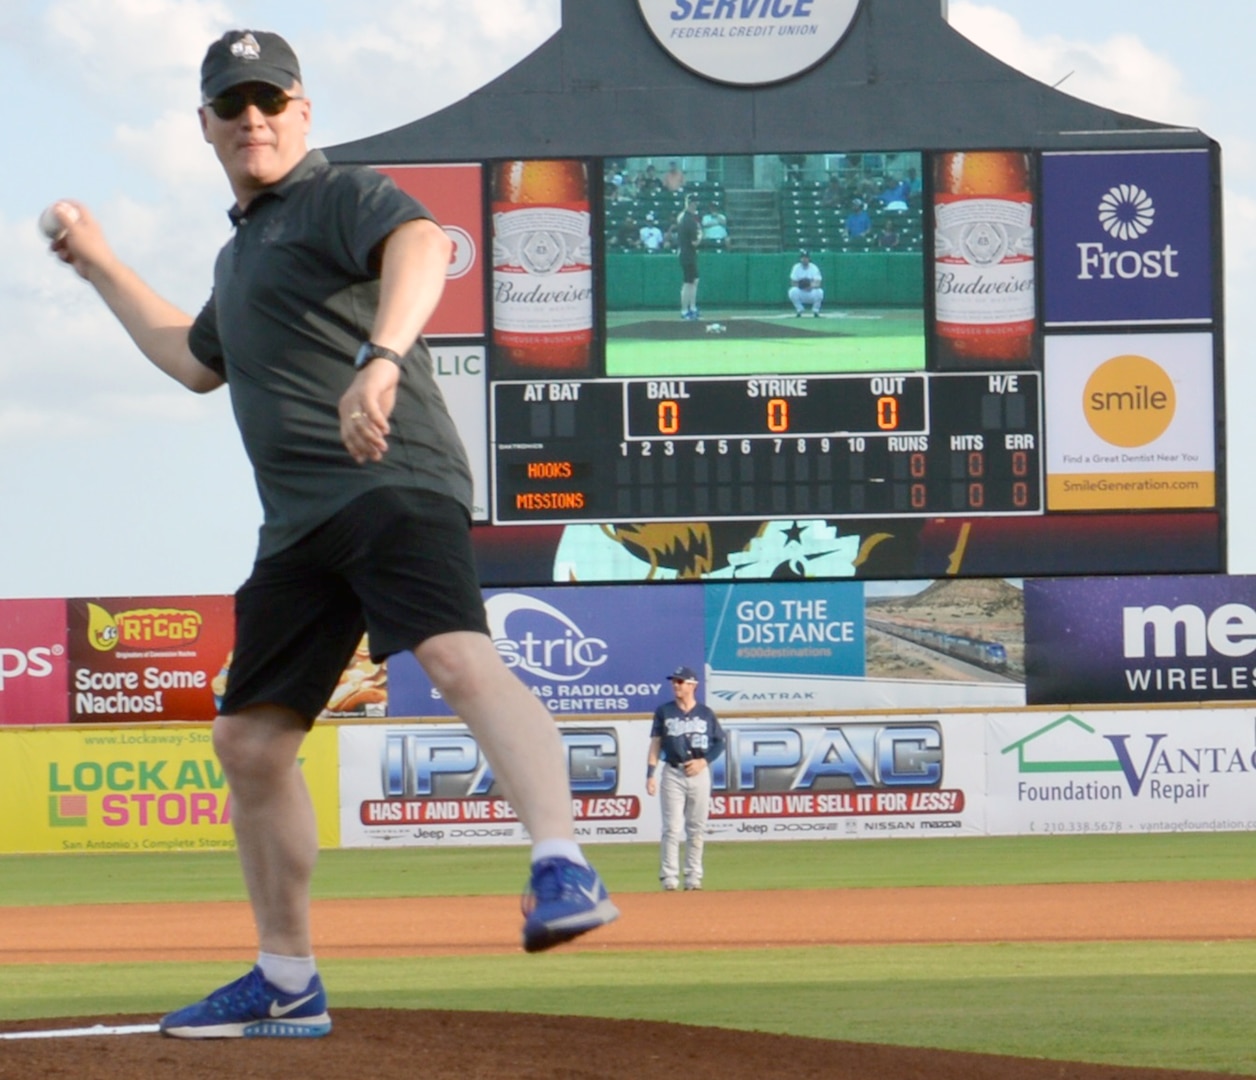 Col. James C. Royse, commander of the 470th Military Intelligence Brigade at Joint Base San Antonio-Fort Sam Houston, threw out the ceremonial first pitch prior to the San Antonio Missions vs. Corpus Christi baseball game at Wolff Stadium in San Antonio June 13.